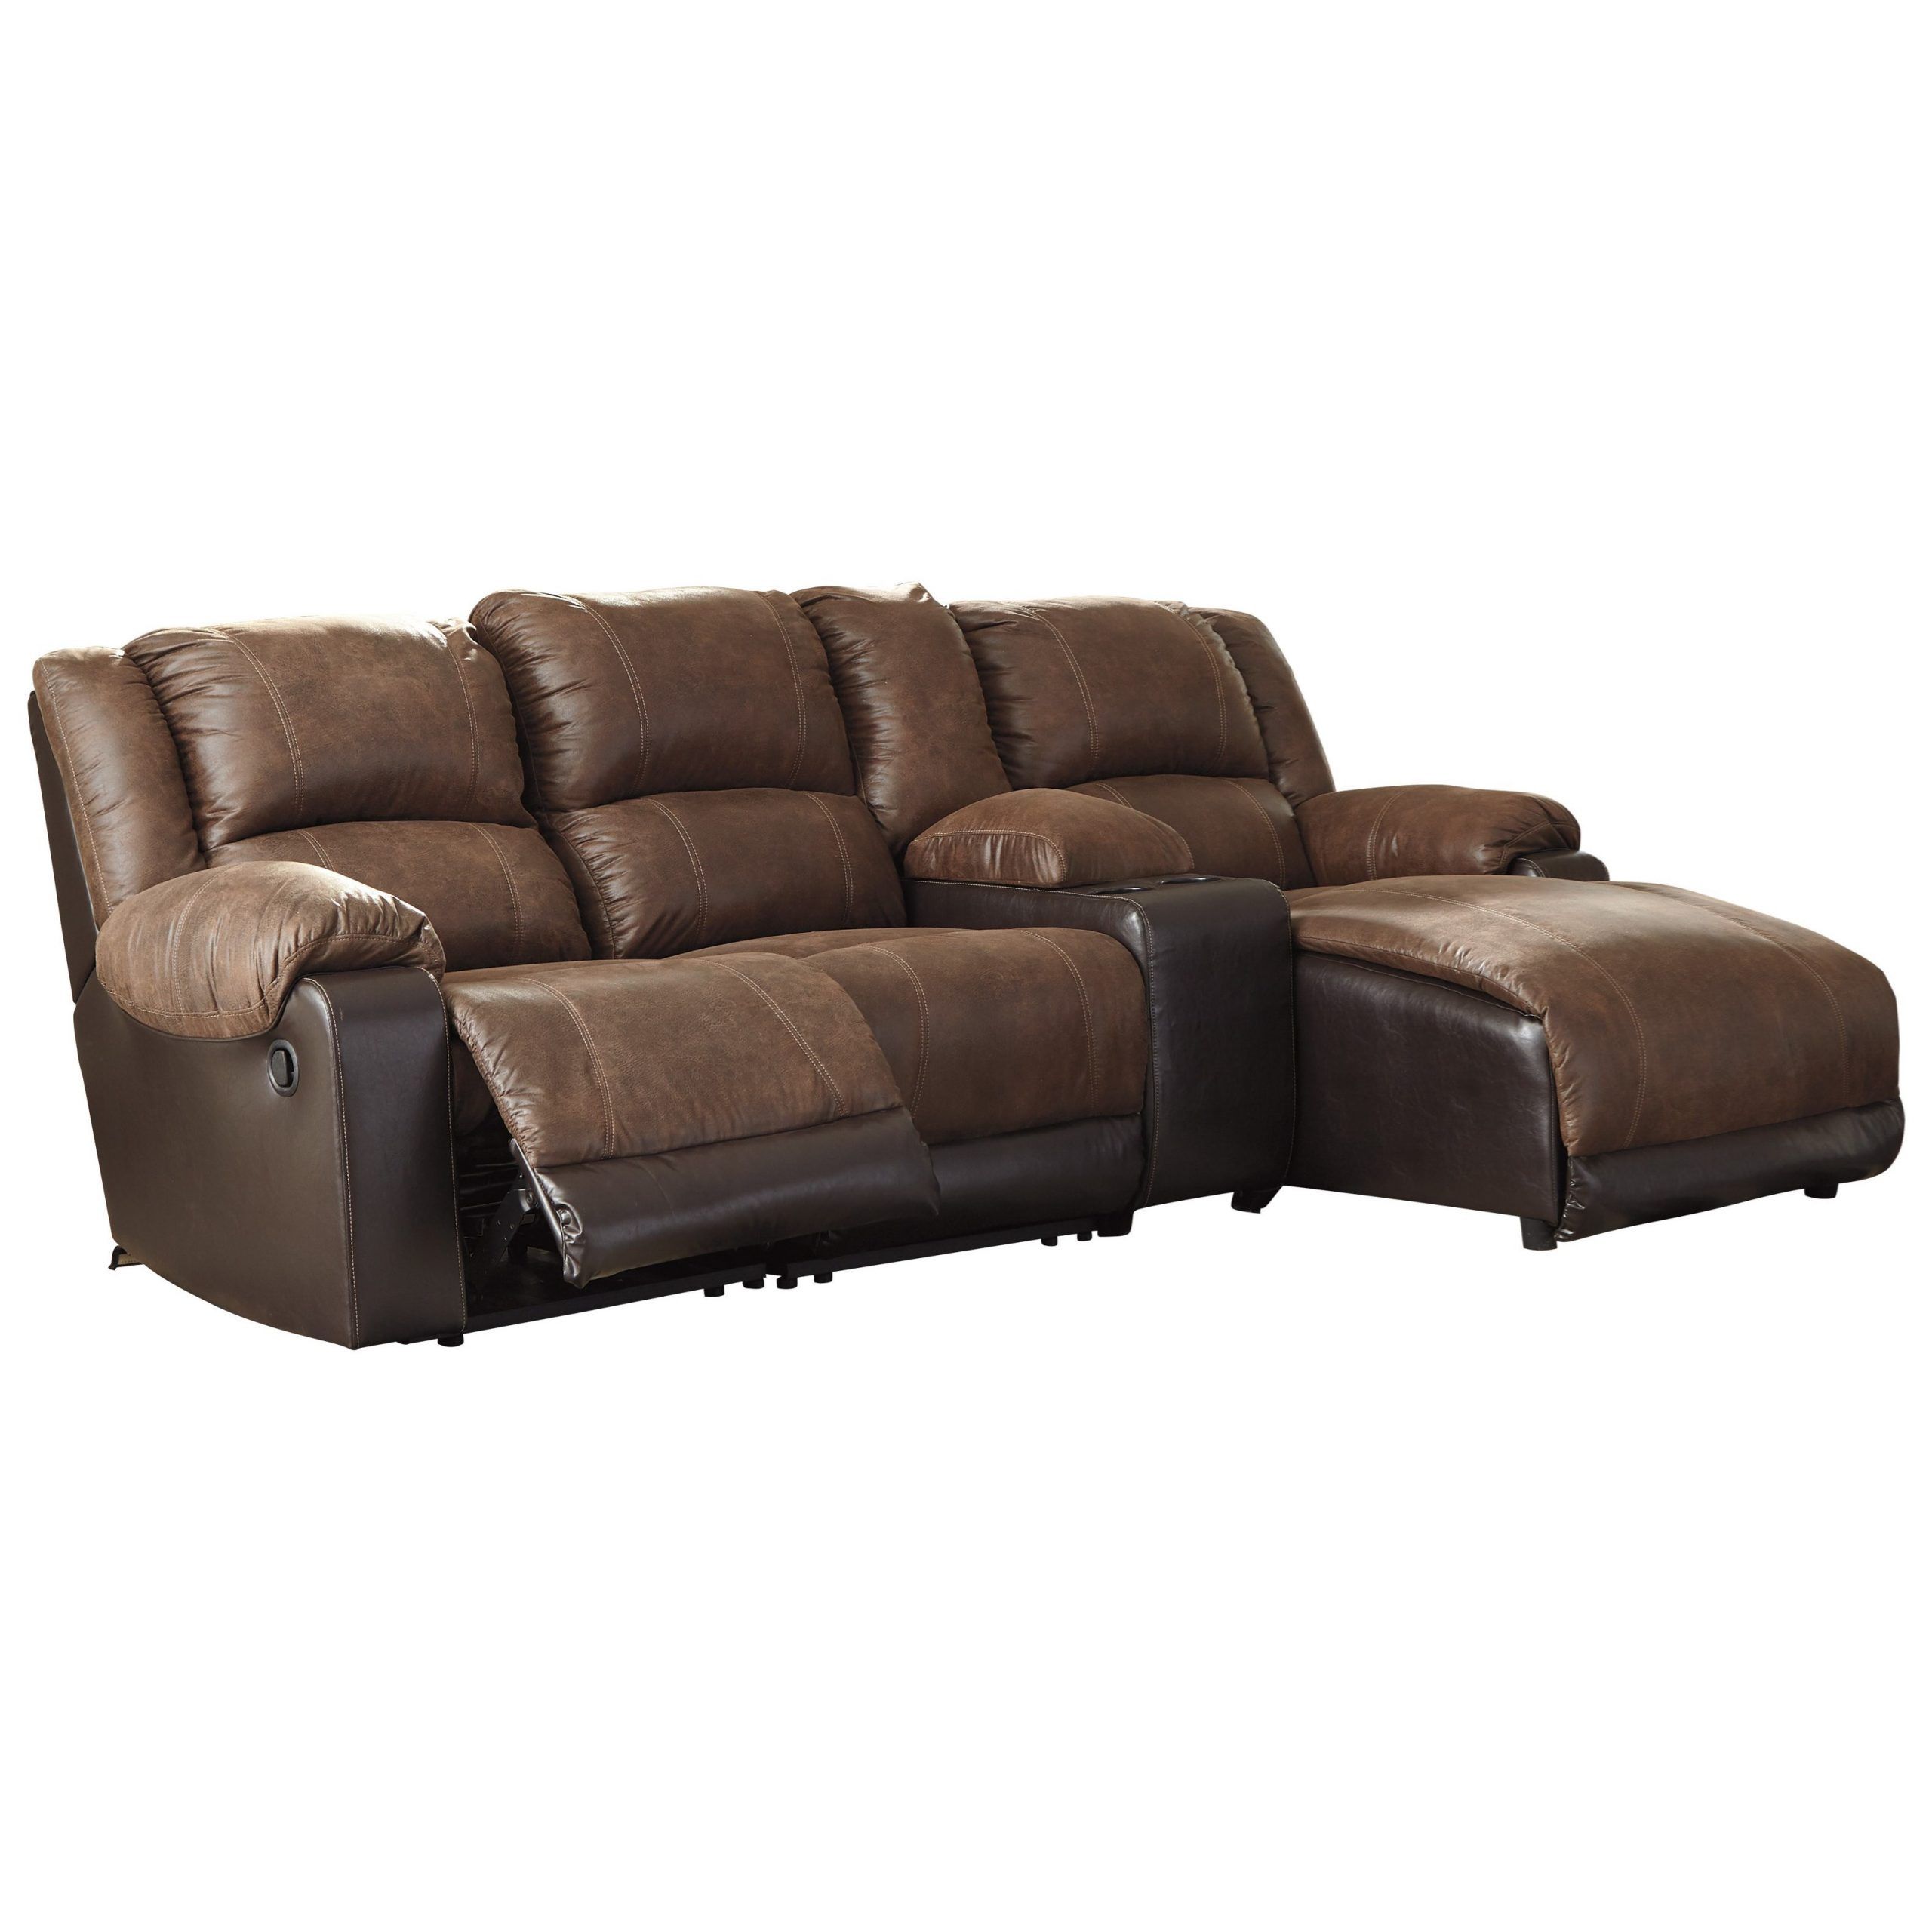 Nantahala Reclining Chaise Sofa With Storage Console | Van With Regard To Palisades Reclining Sectional Sofas With Left Storage Chaise (View 7 of 15)